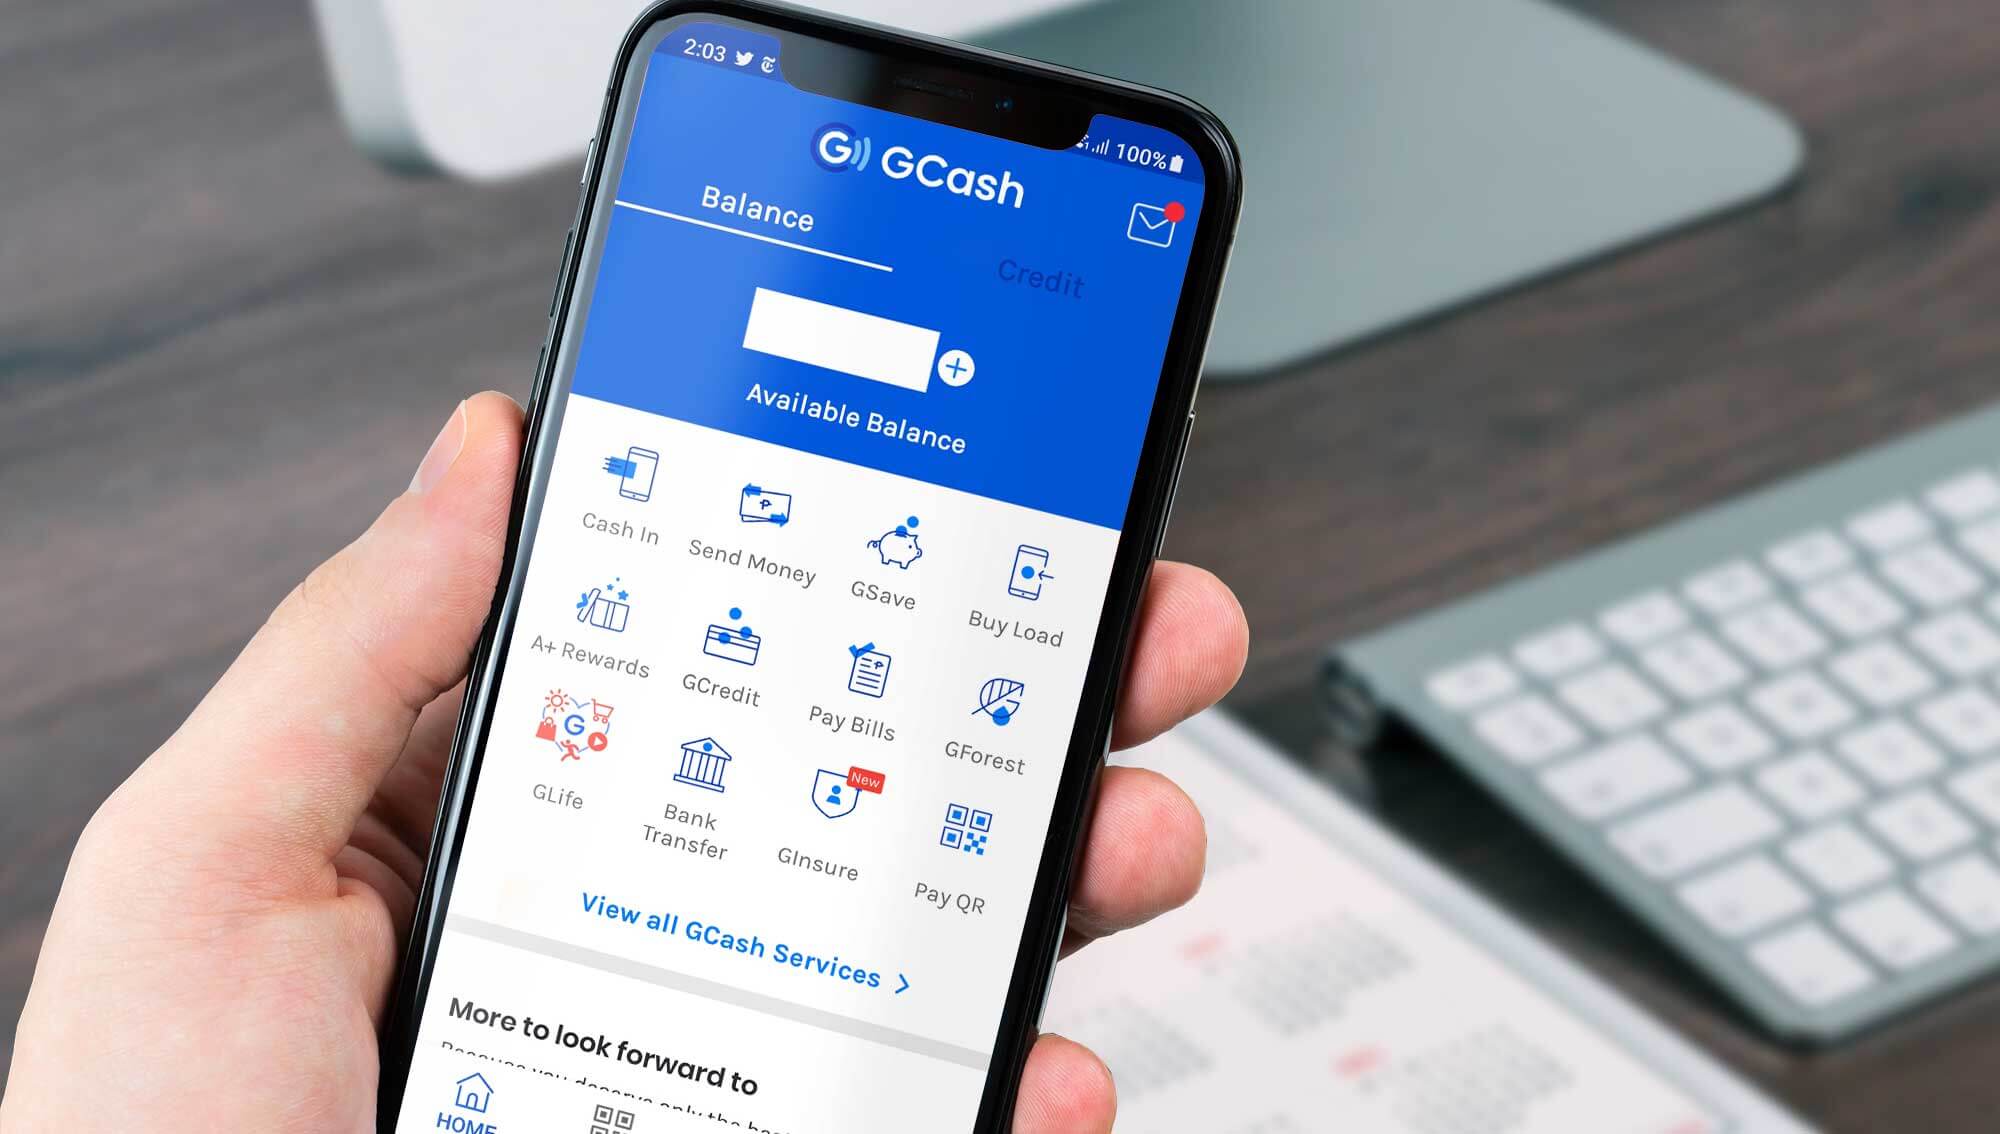 GCash achieves profitability ahead of sked, now ‘gold standard’ in fintech